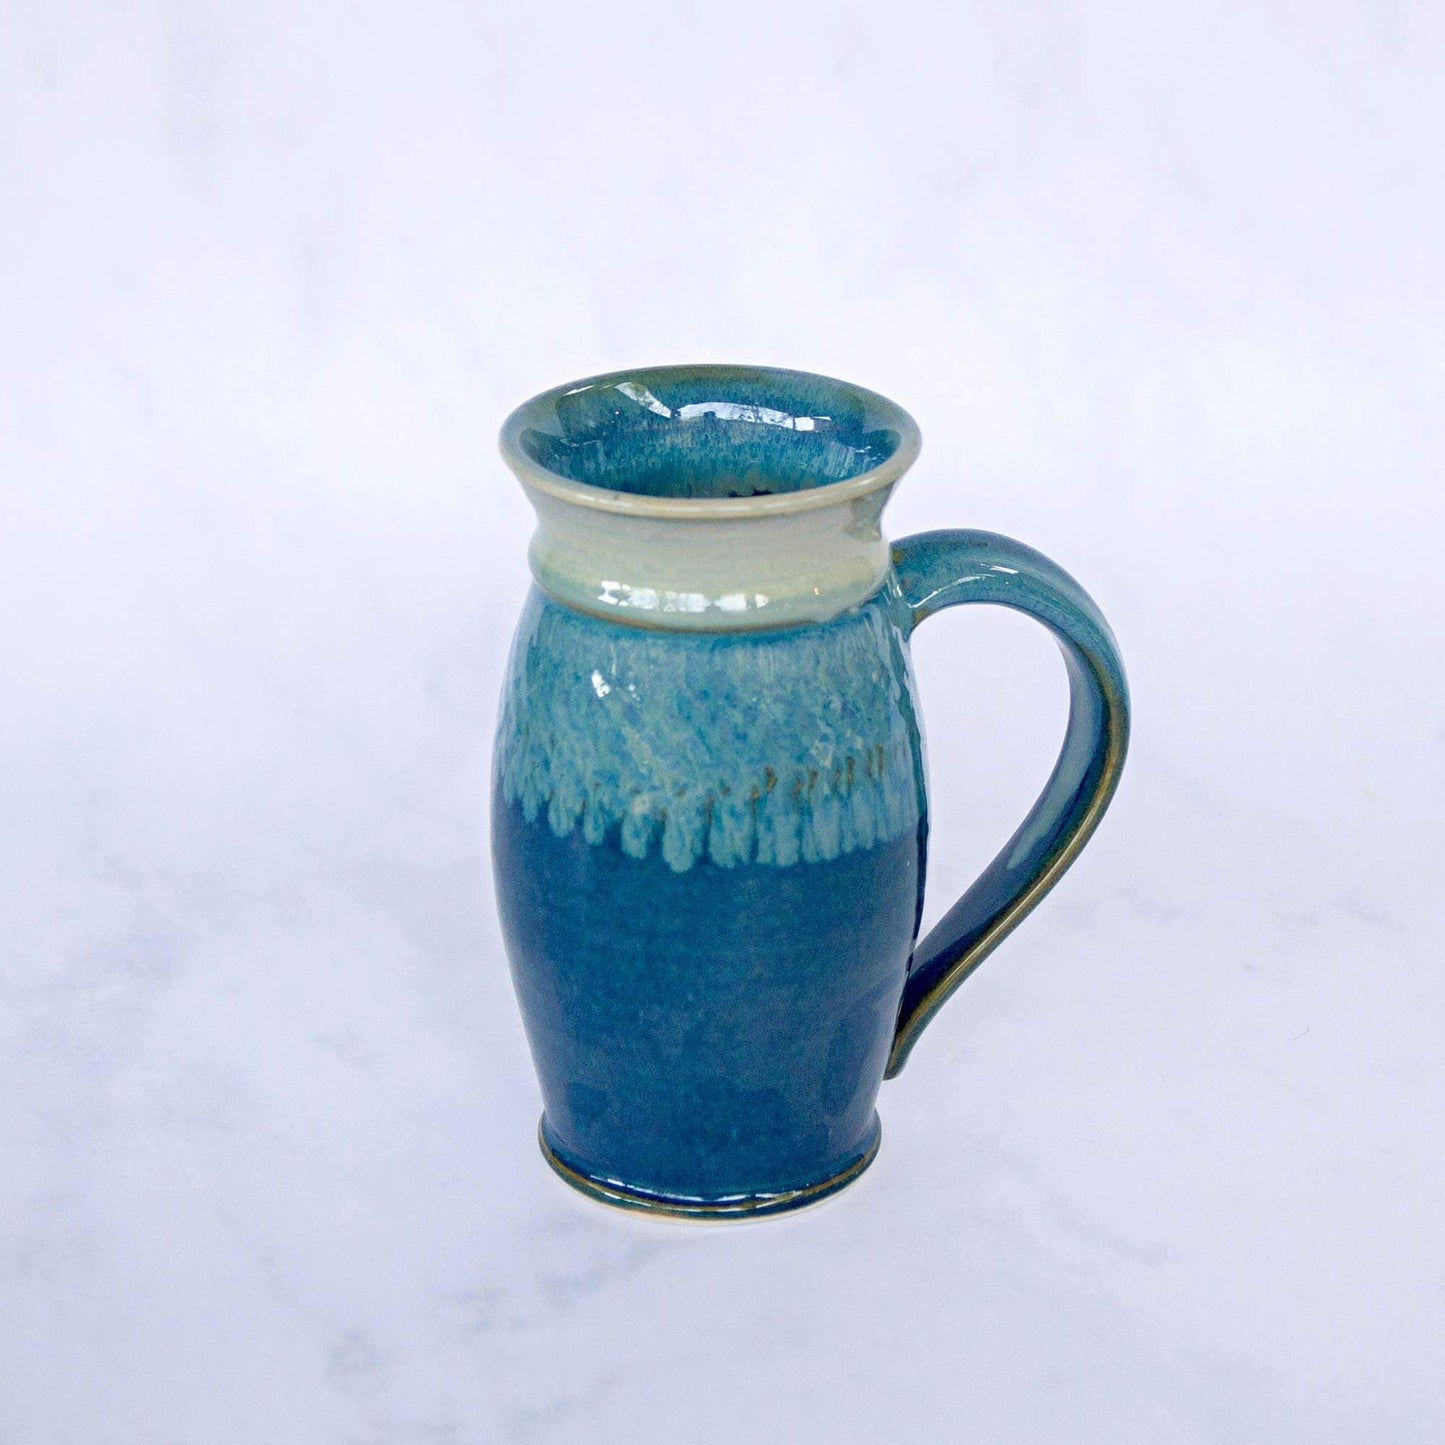 Handmade Pottery Beer Stein in Cobalt pattern made by Georgetown Pottery in Maine